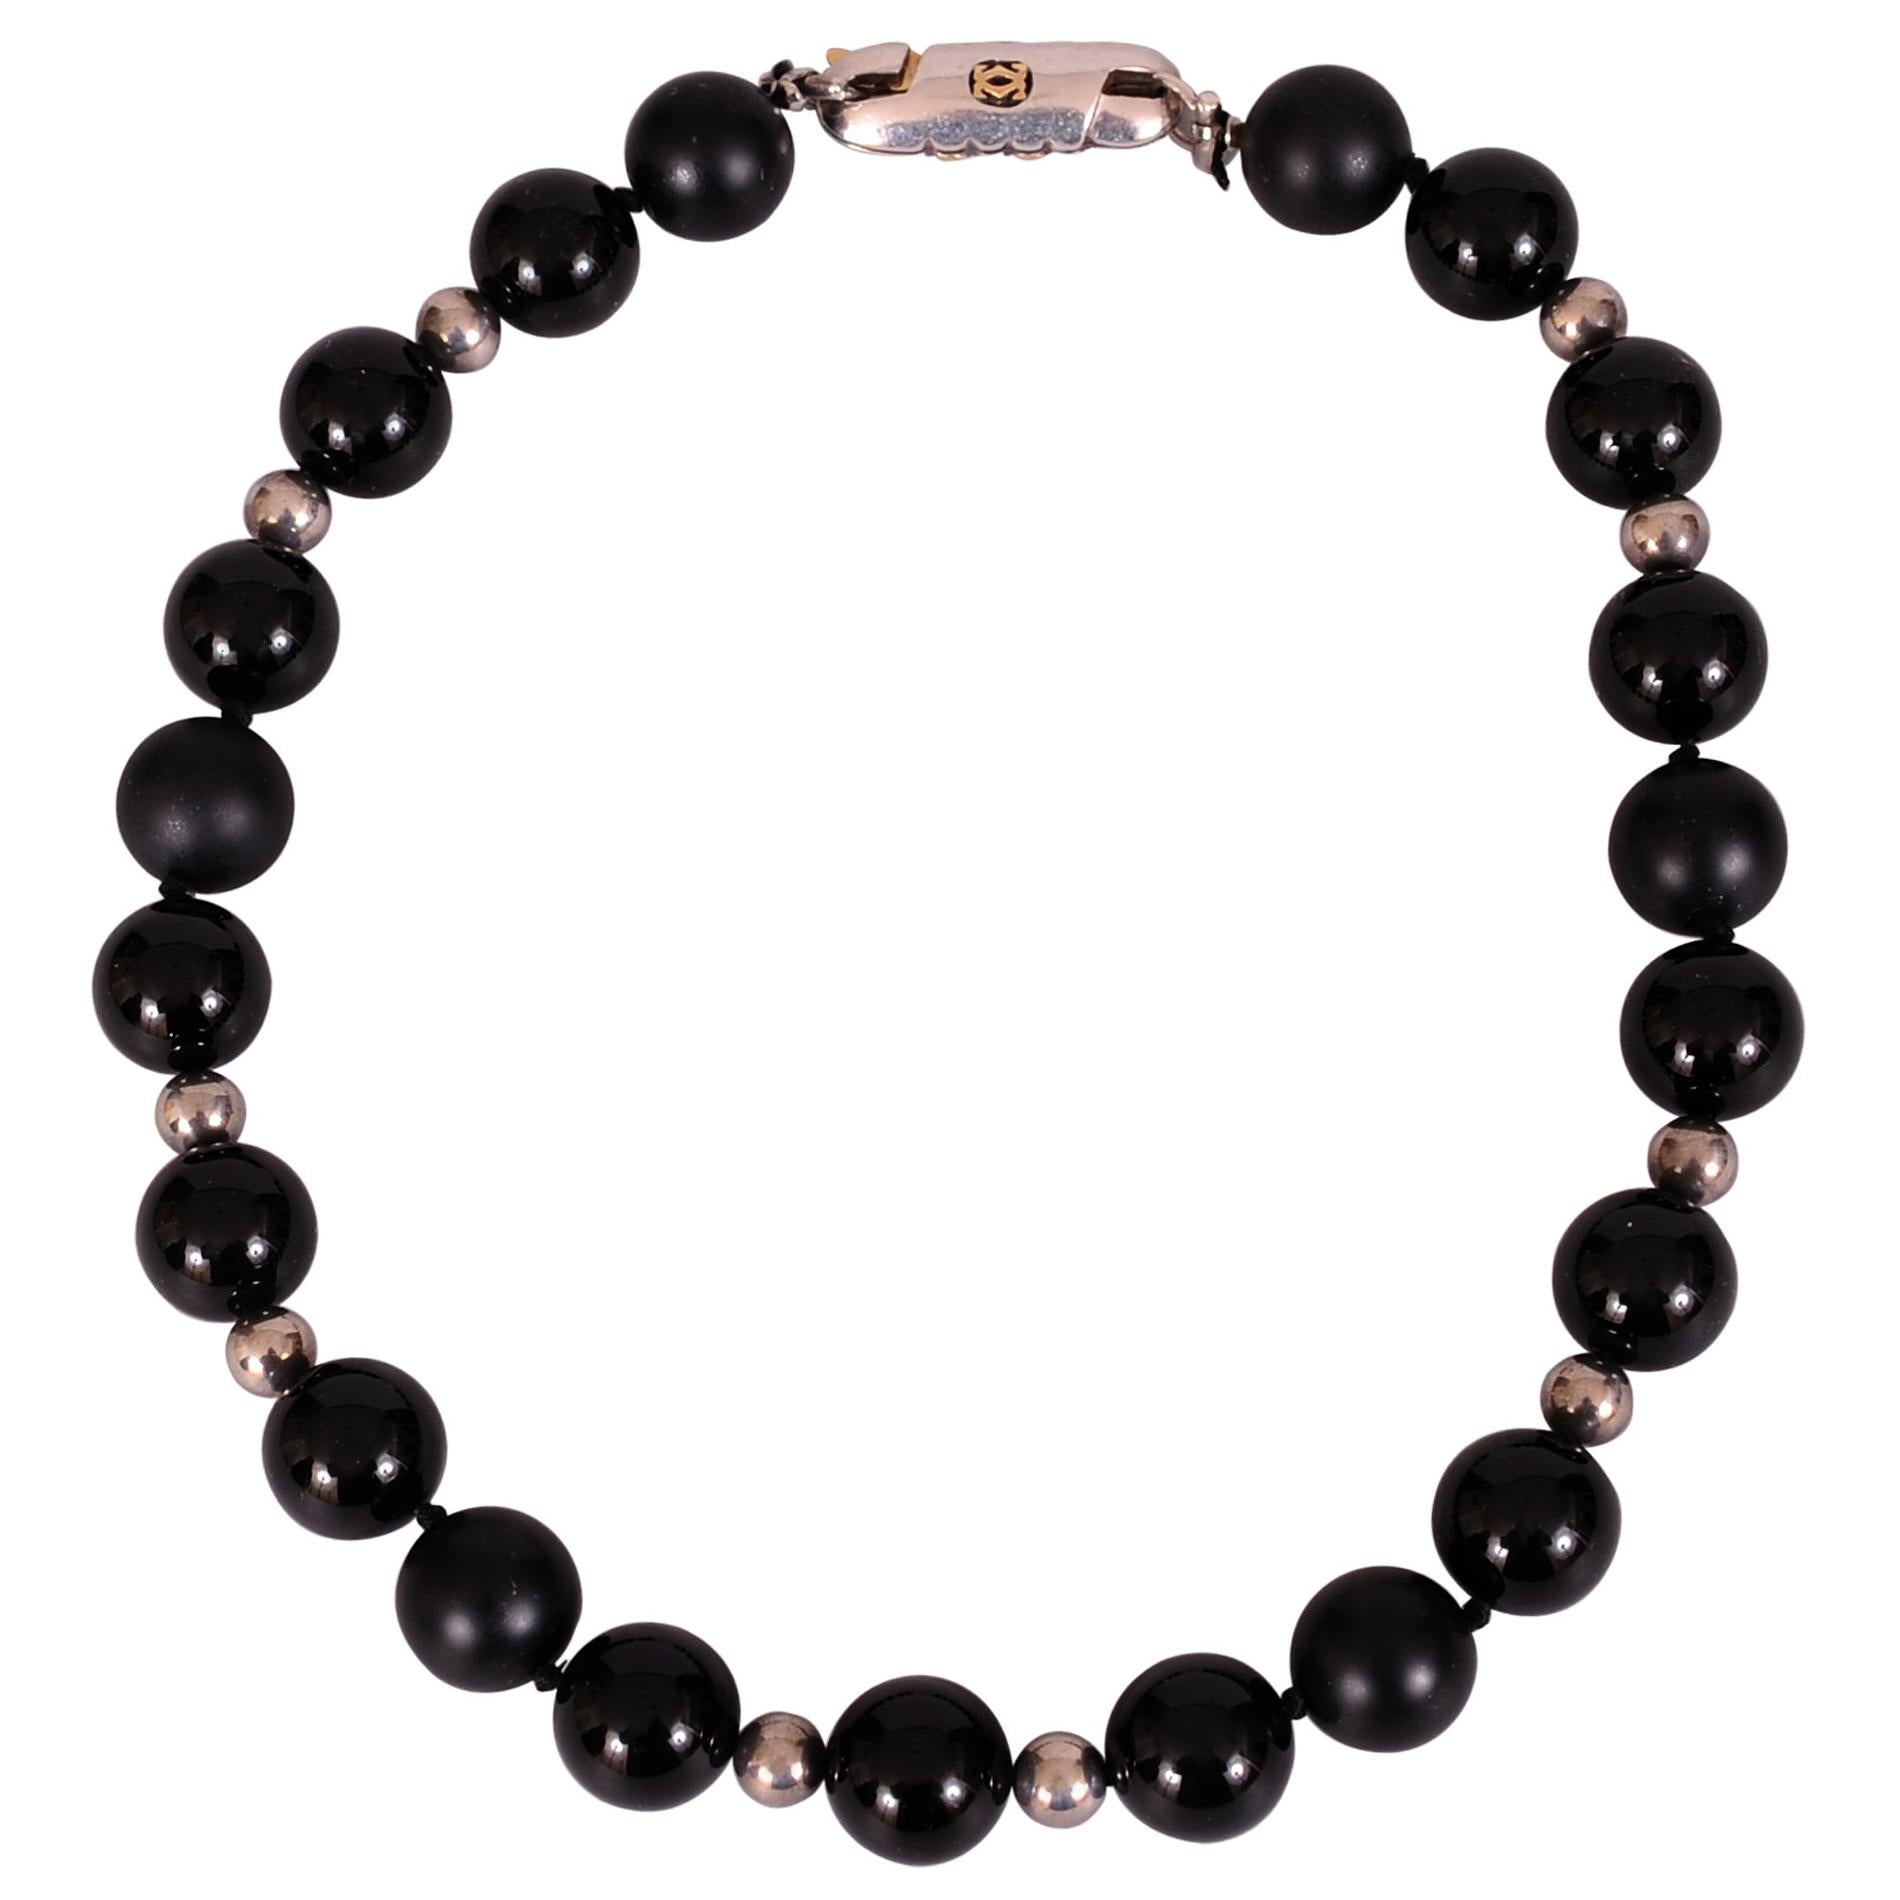 Cartier Necklace Matte and Polished Onyx & Silver Beads Silver & Gold Clasp 